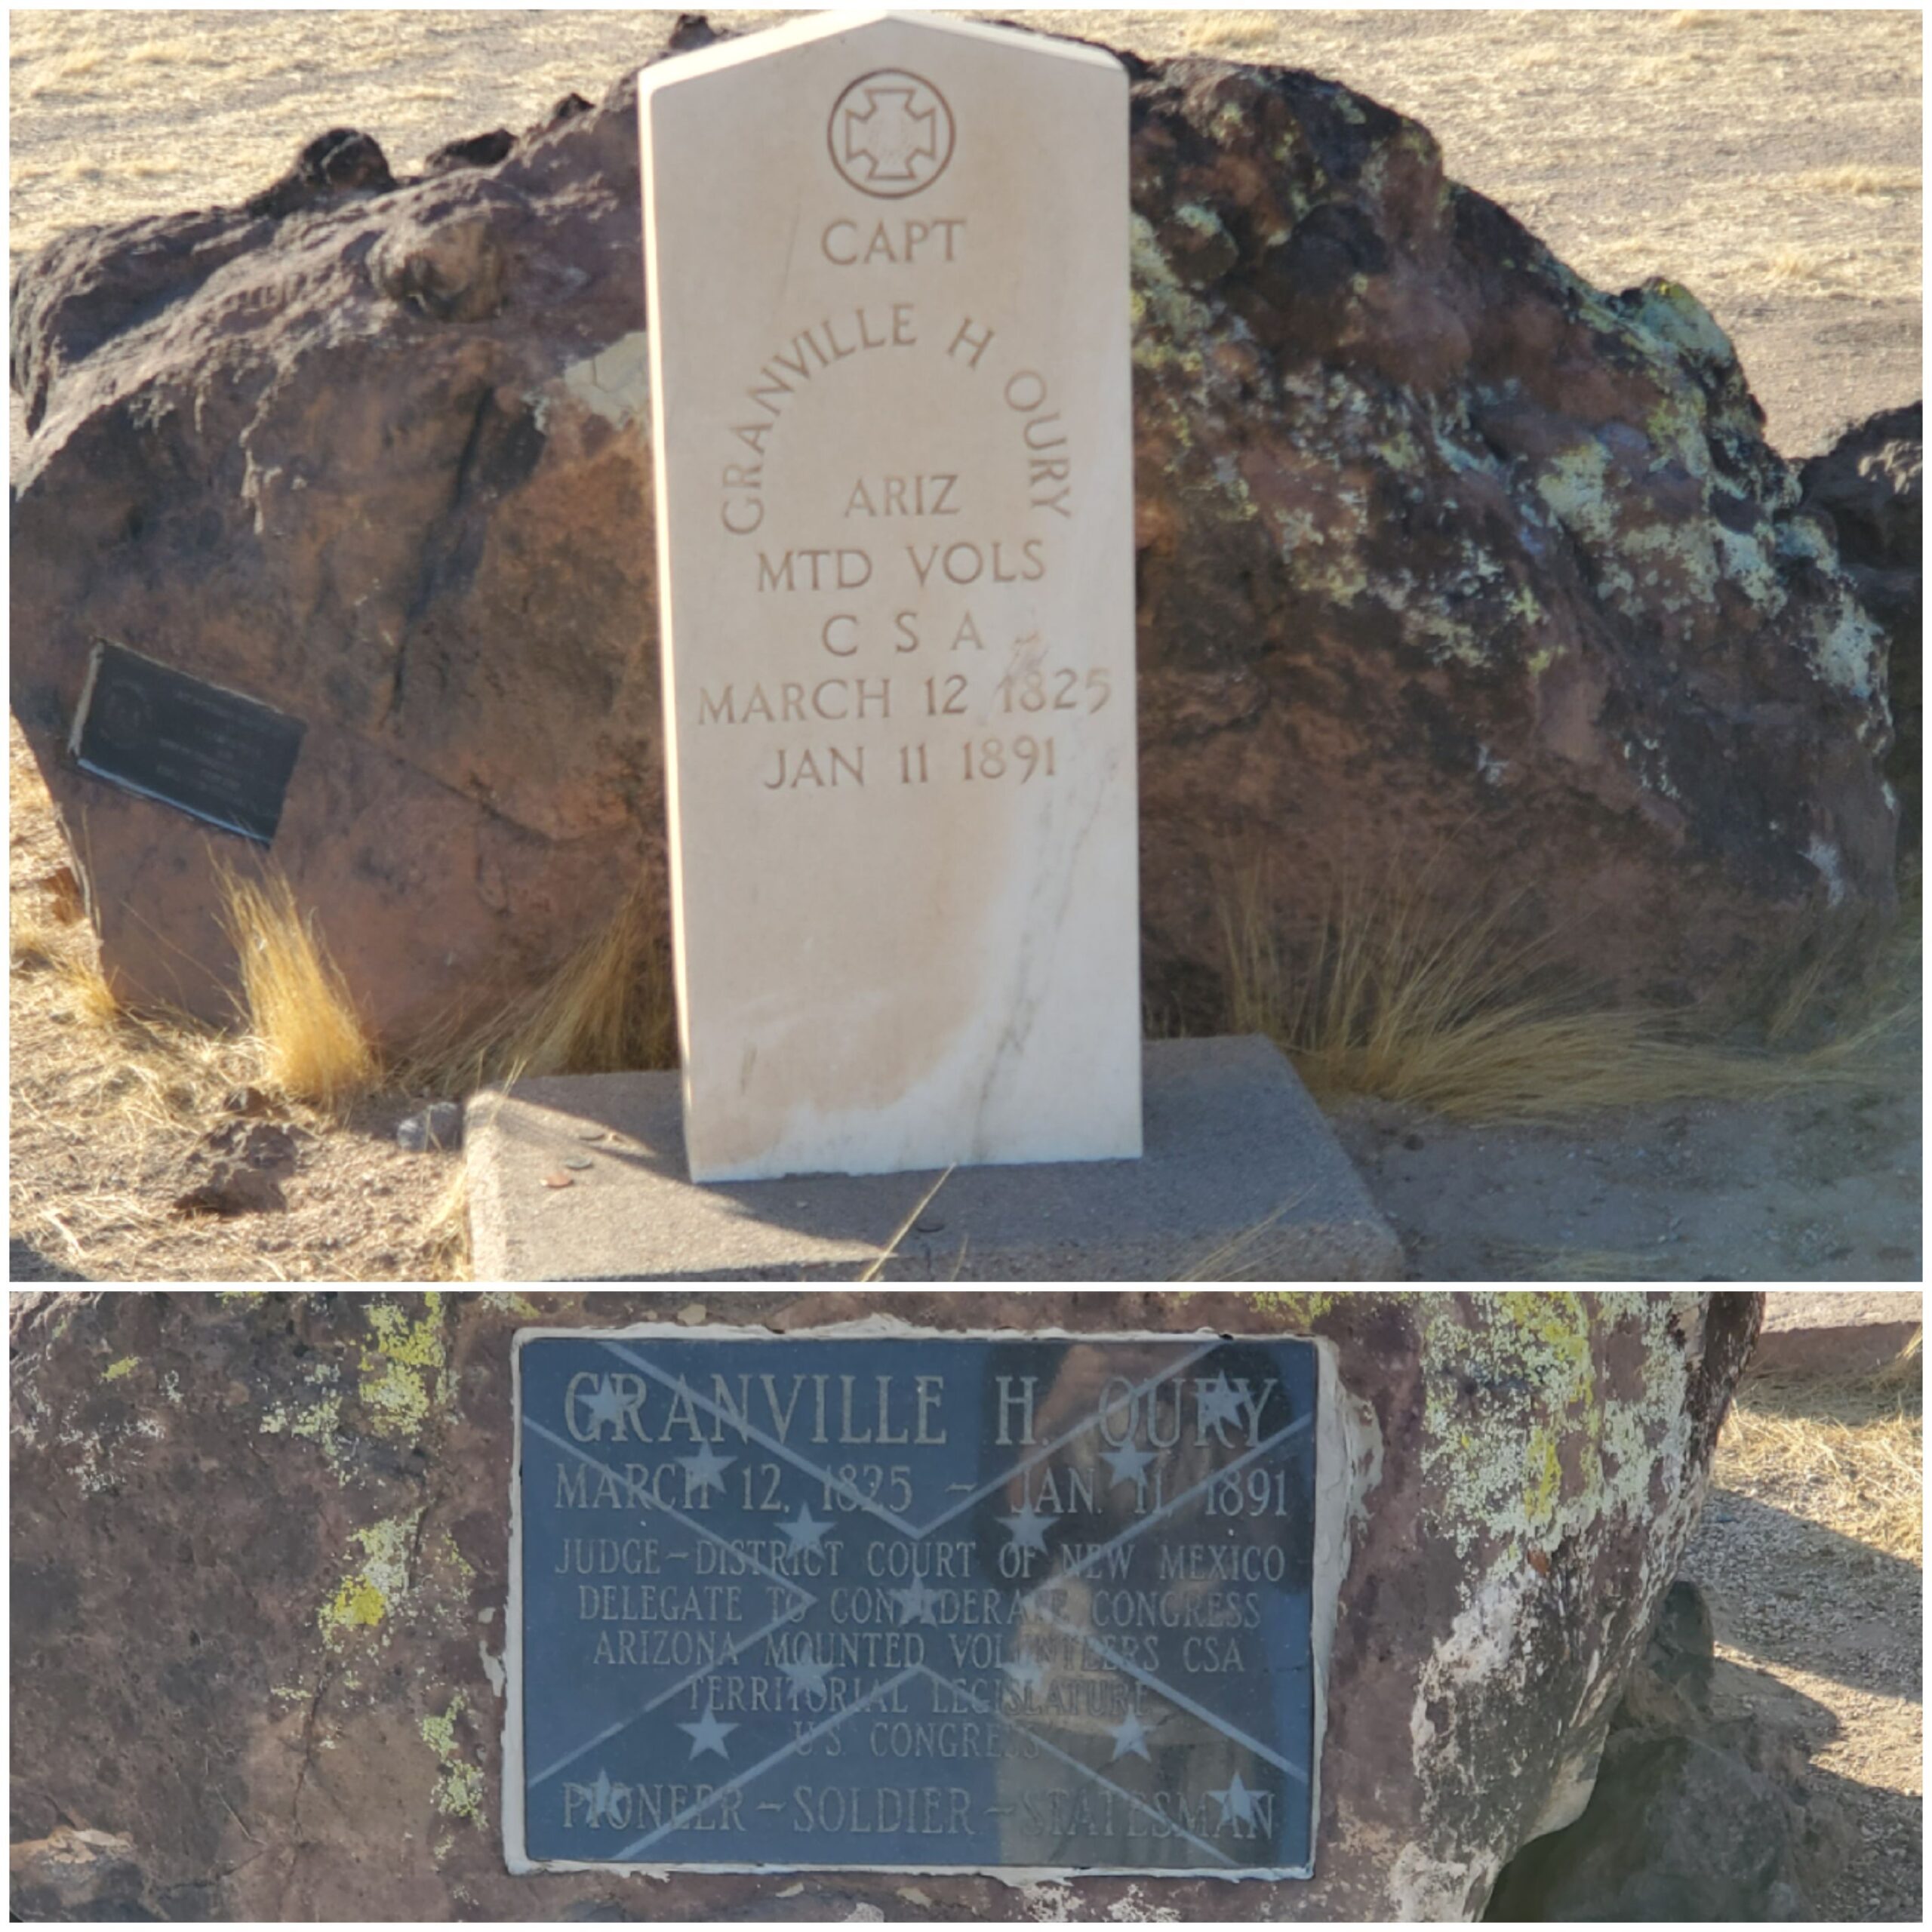 Captain Oury's government issue marker is on the top of this image while the engraved polished stone is beneath. I took both of these photos in November of 2020